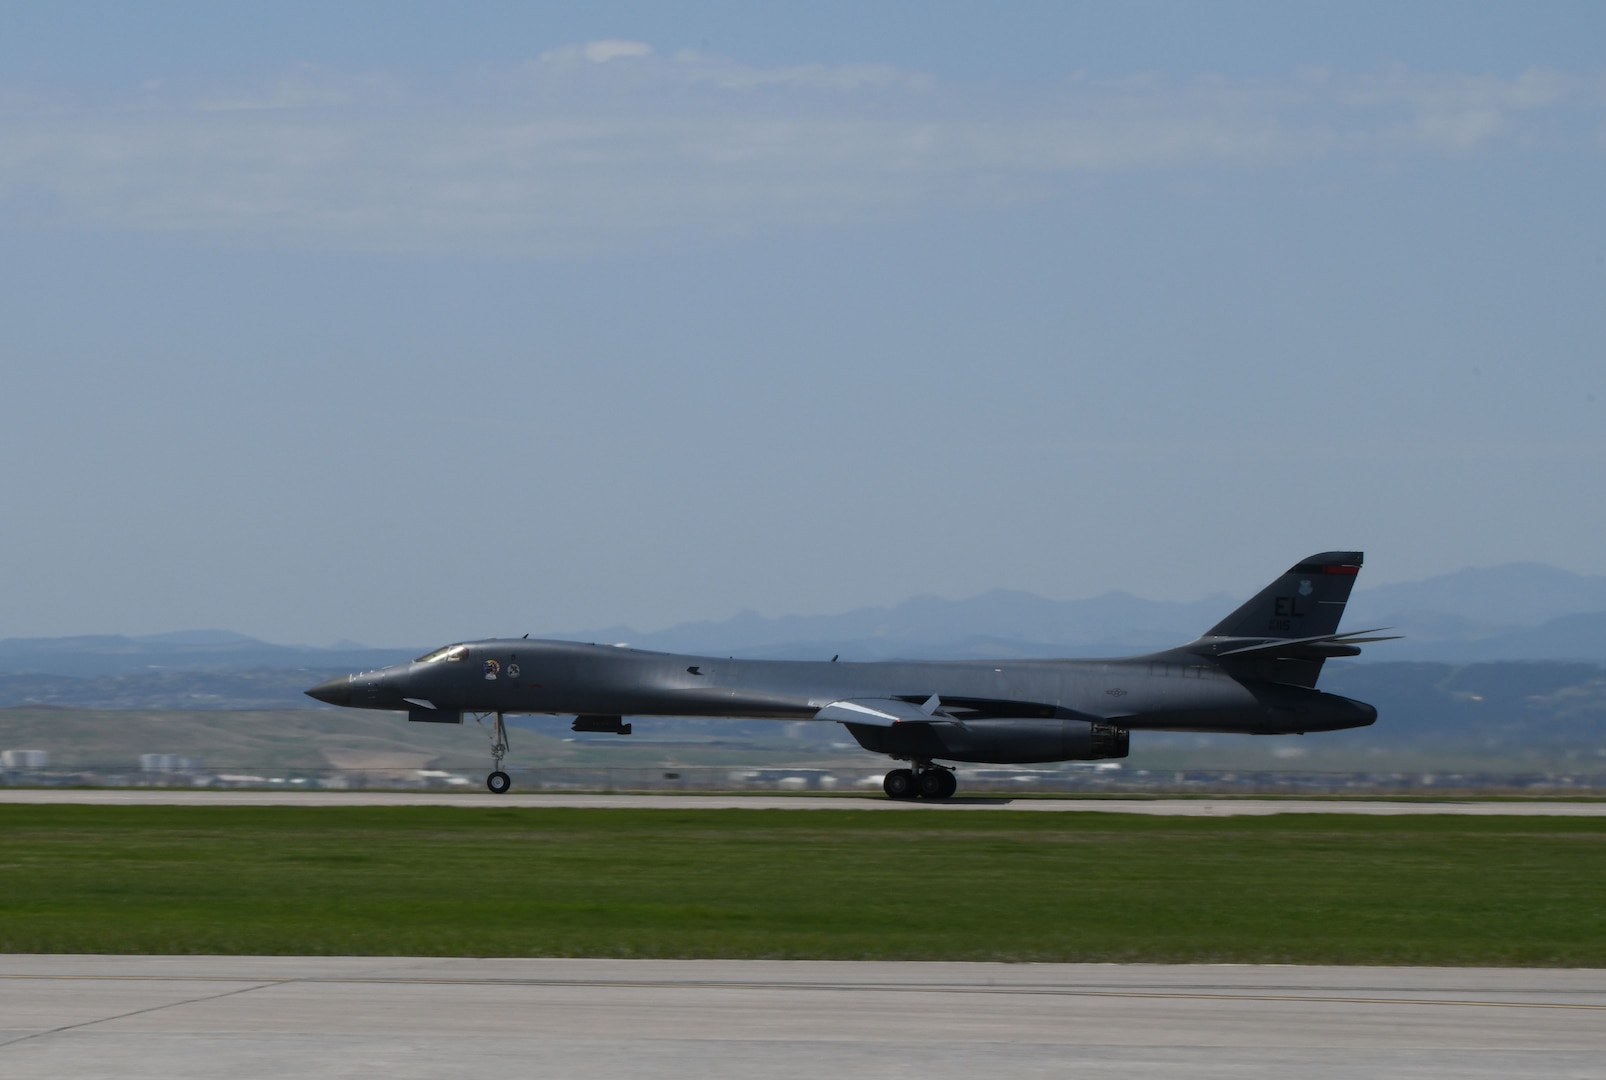 A 34th Bomb Squadron B-1B Lancer taxis down the runway after landing on Ellsworth Air Force Base, S.D., May 20, 2020.  This followed the completion of a long-range, long-duration Bomber Task Force mission to the U.S. European Command area of responsibility. BTF missions provide opportunities to work and train with U.S. allies and partners, while strengthening capabilities by familiarizing aircrew with air bases and operations in different parts of the world. (U.S. Air Force photo by Airman 1st Class Christina Bennett)